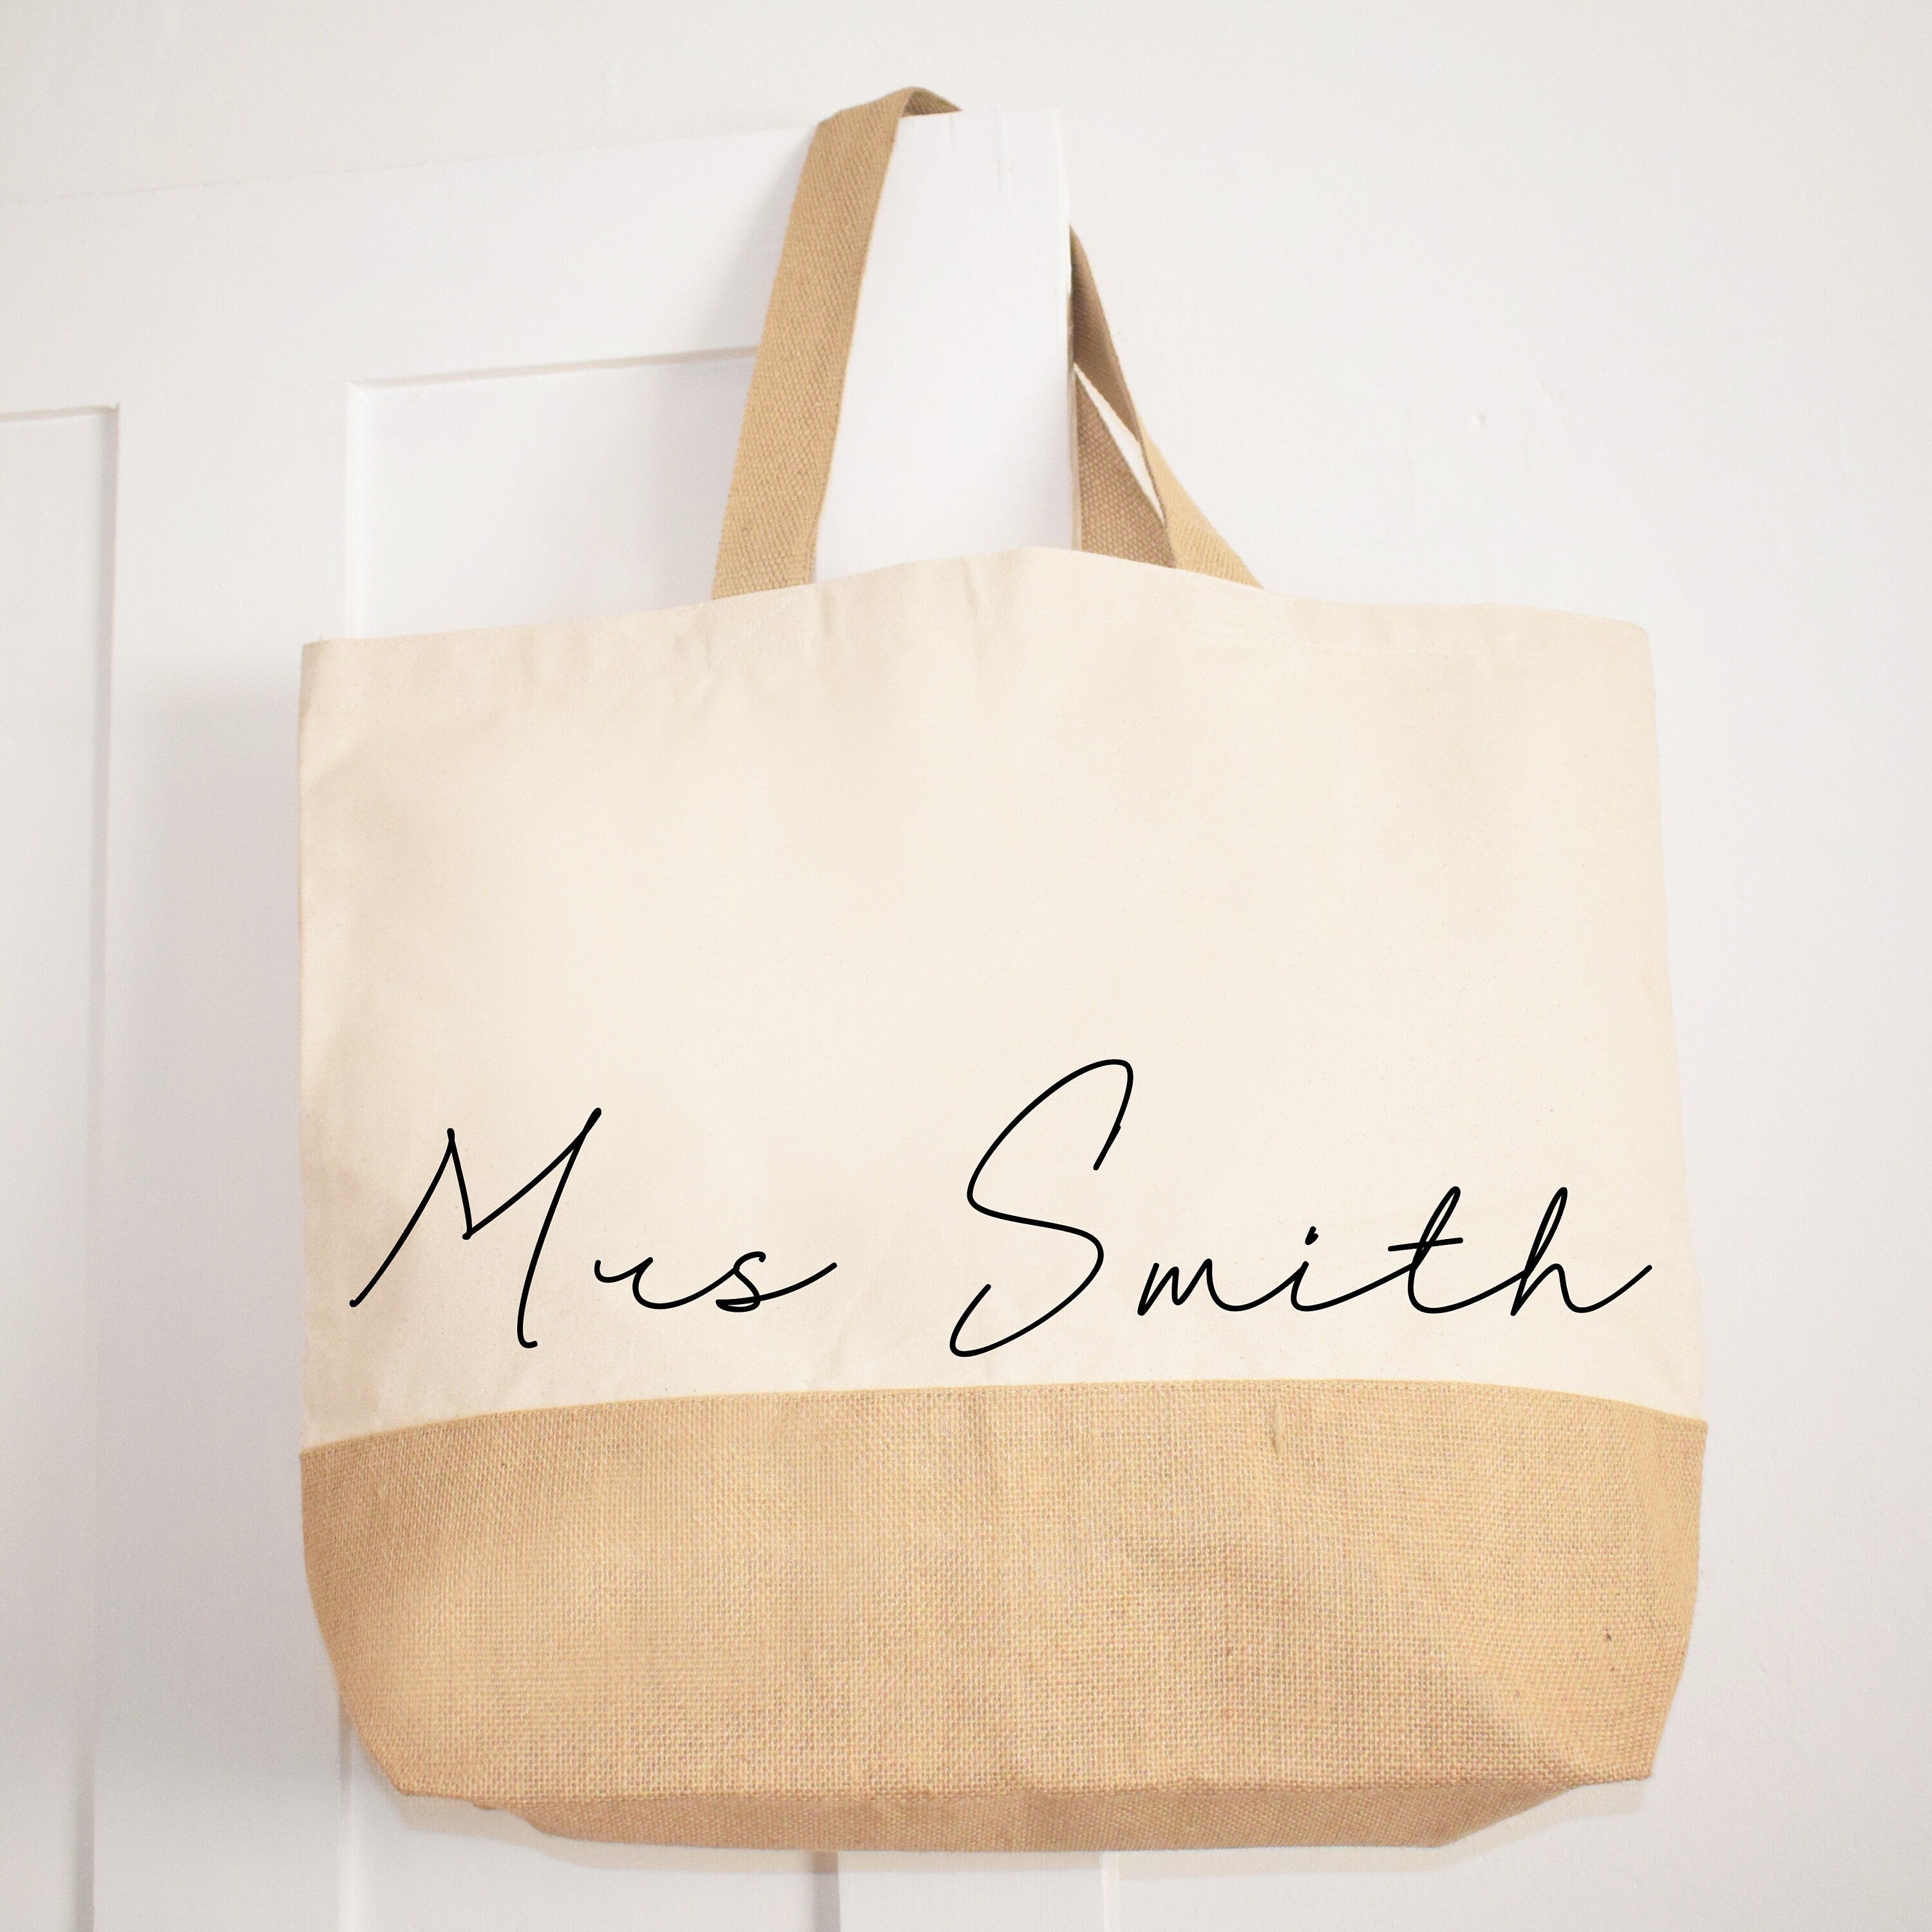 Personalised Handwritten type Jute base Canvas Oversized Tote Shopping and Beach Bag, holiday and travel bag, Market shoulder Bag